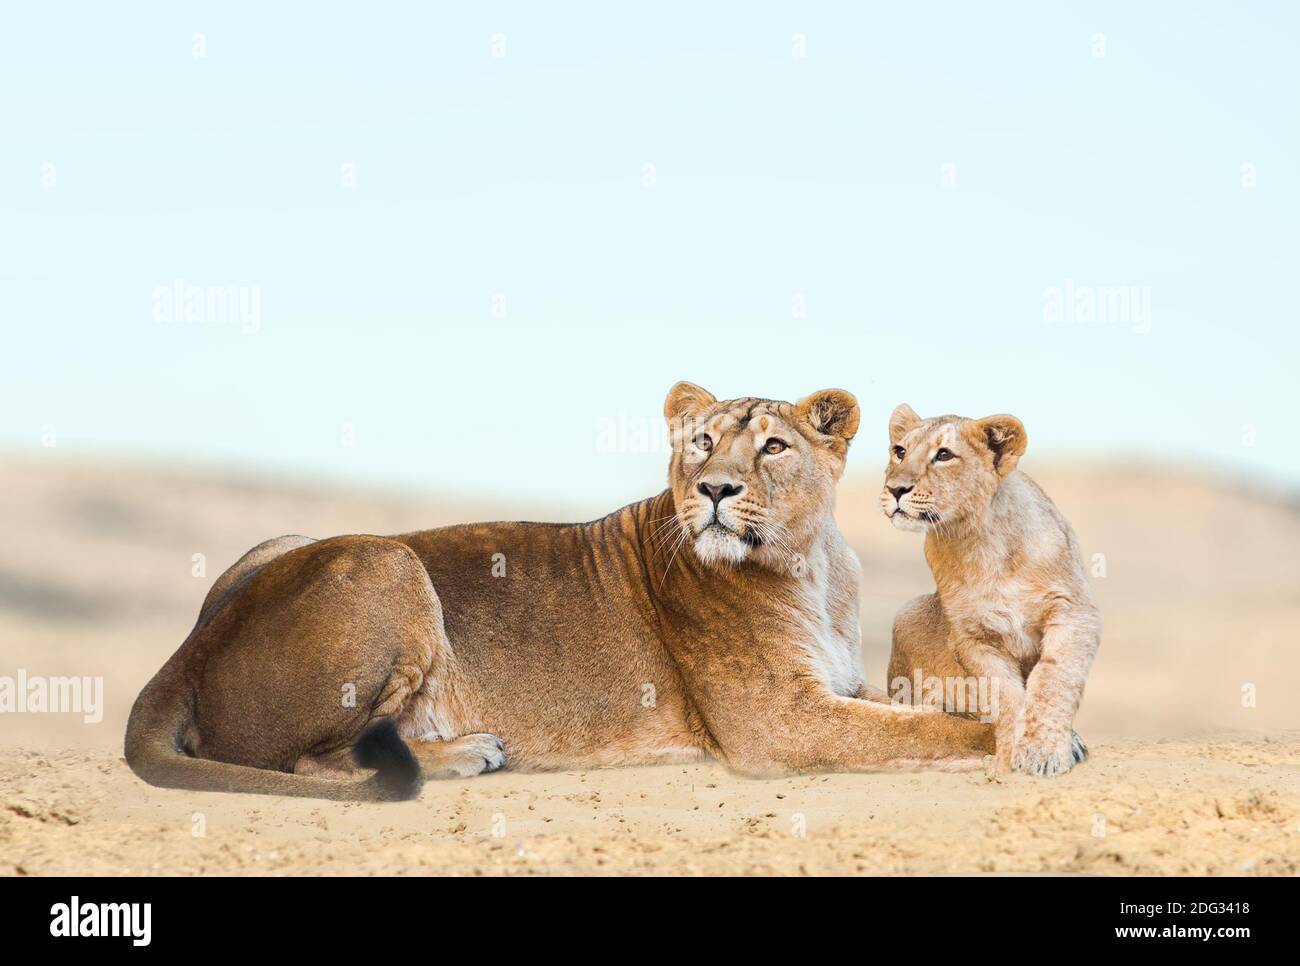 Lioness with her cub having rest in desert Stock Photo